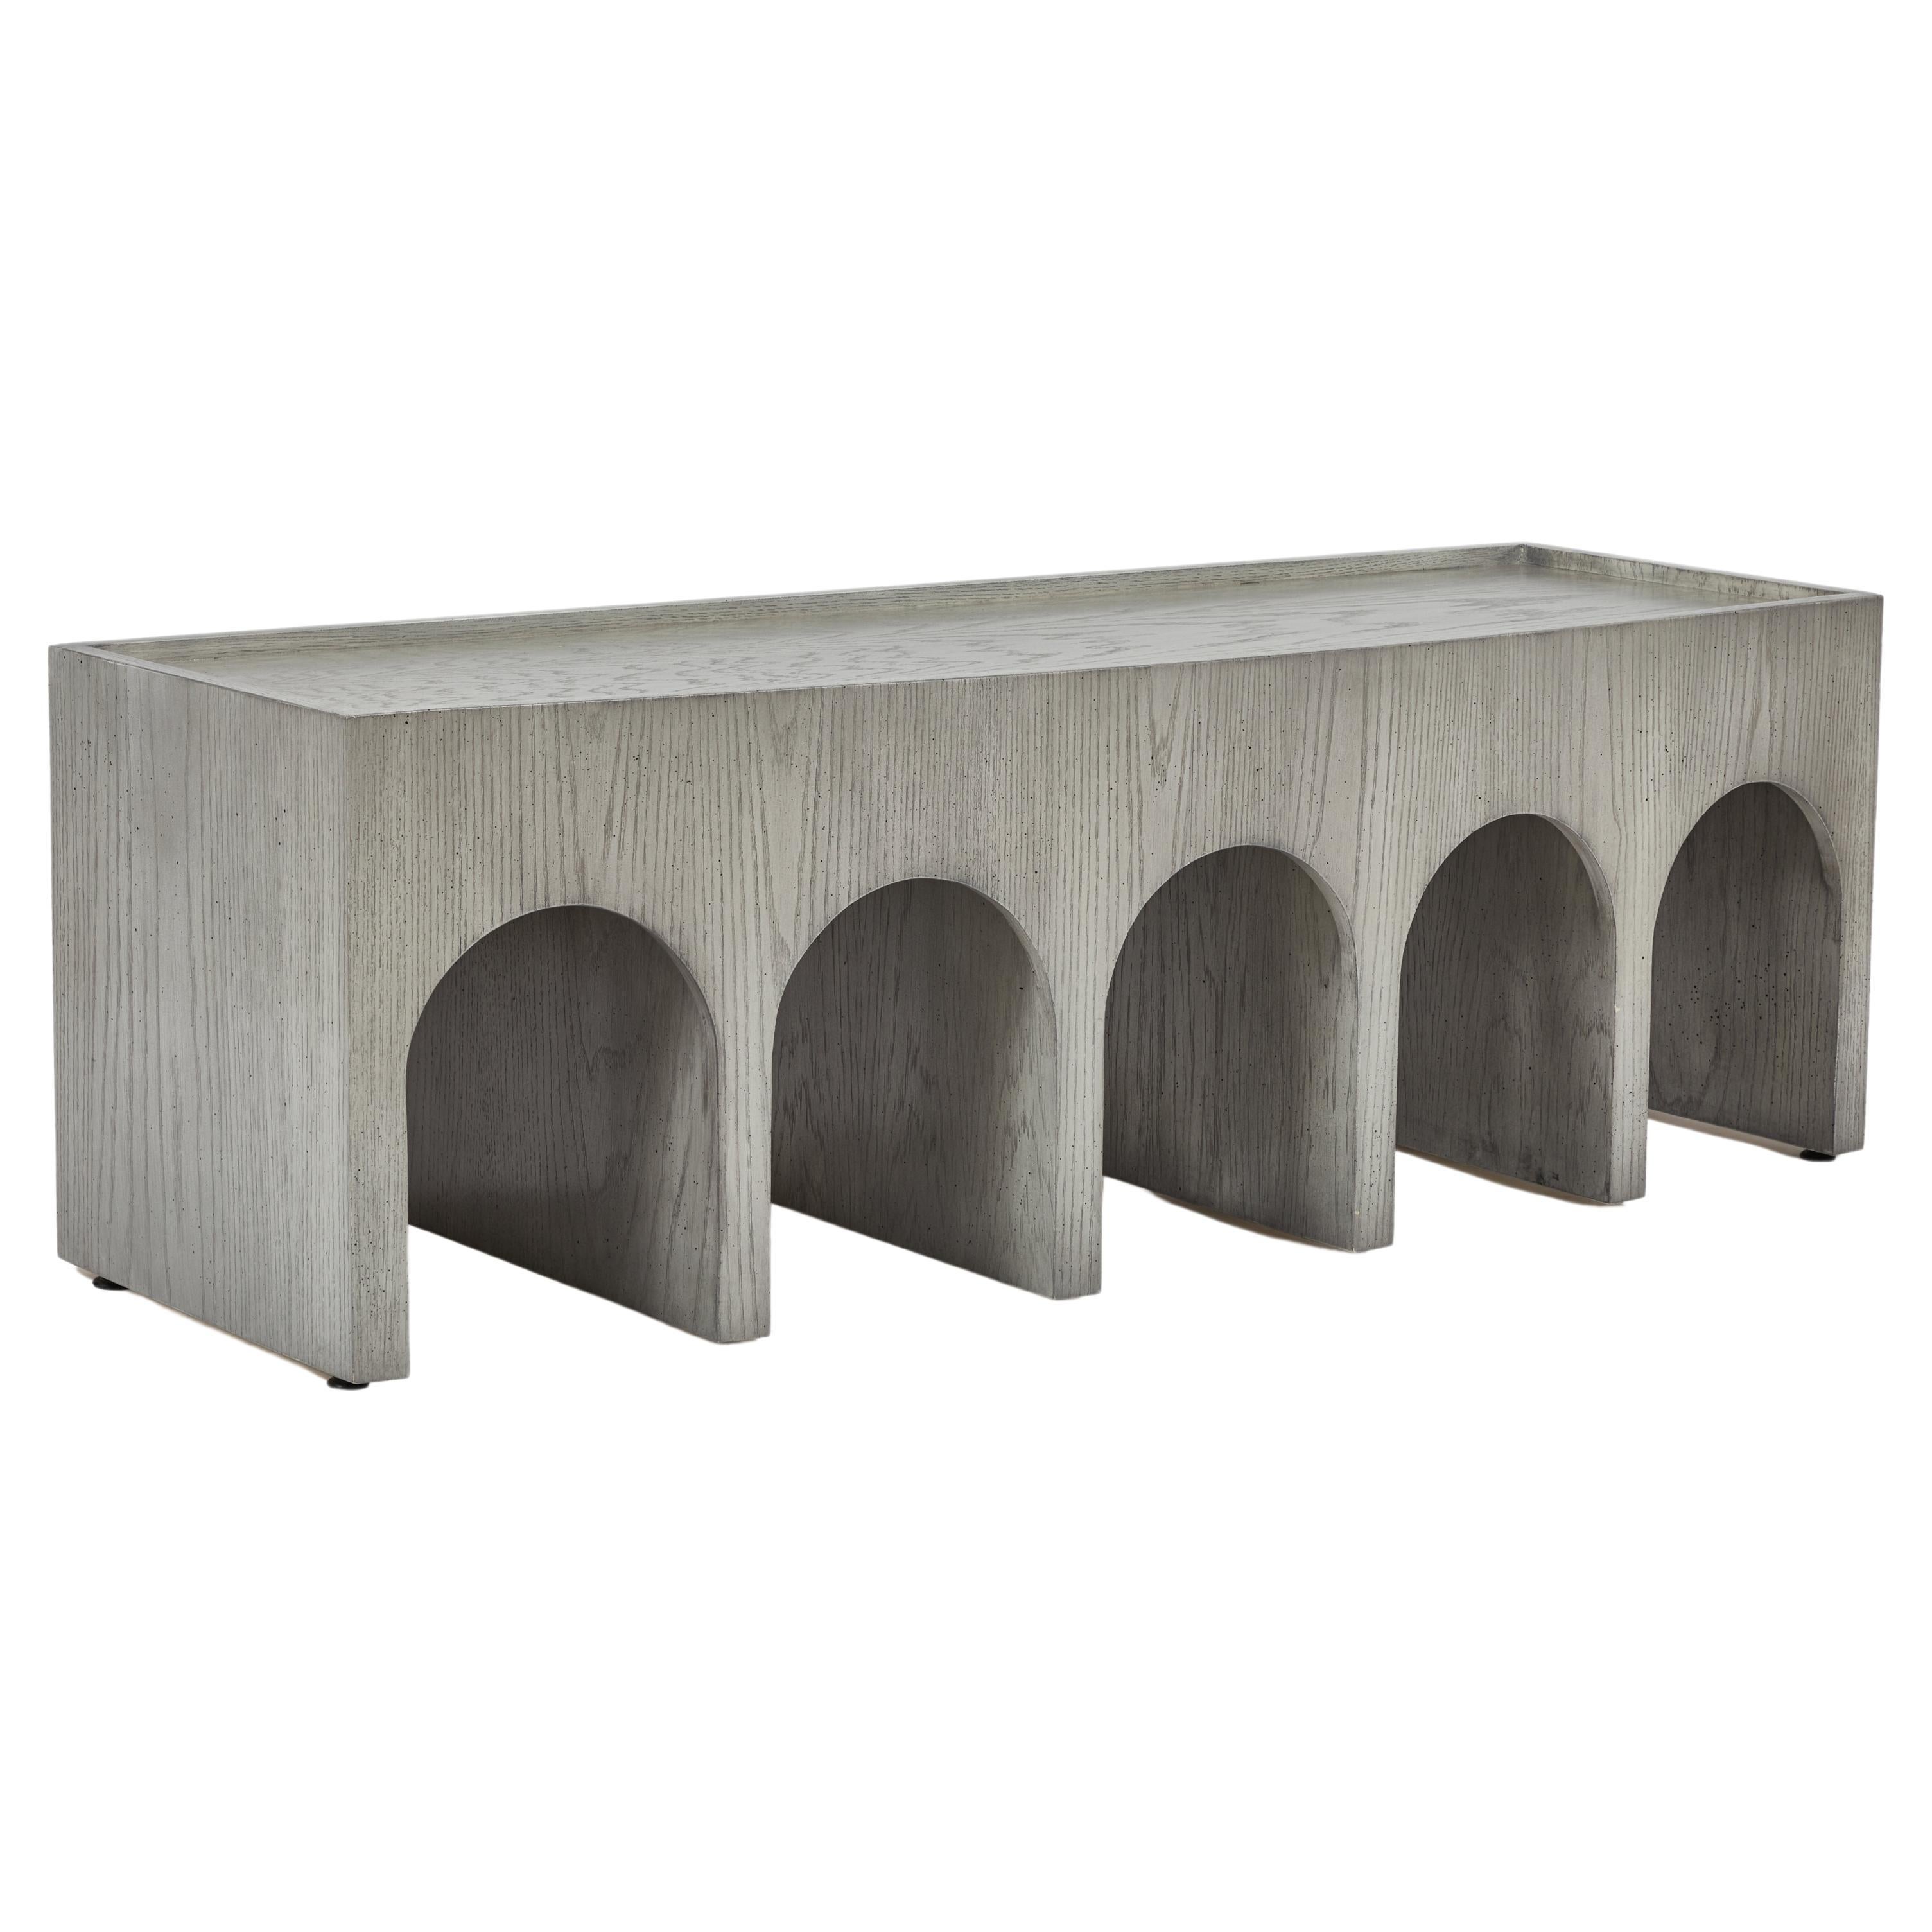 Minimalist Arched Upholstered Bench in Italian Gray Oak by Martin and Brockett